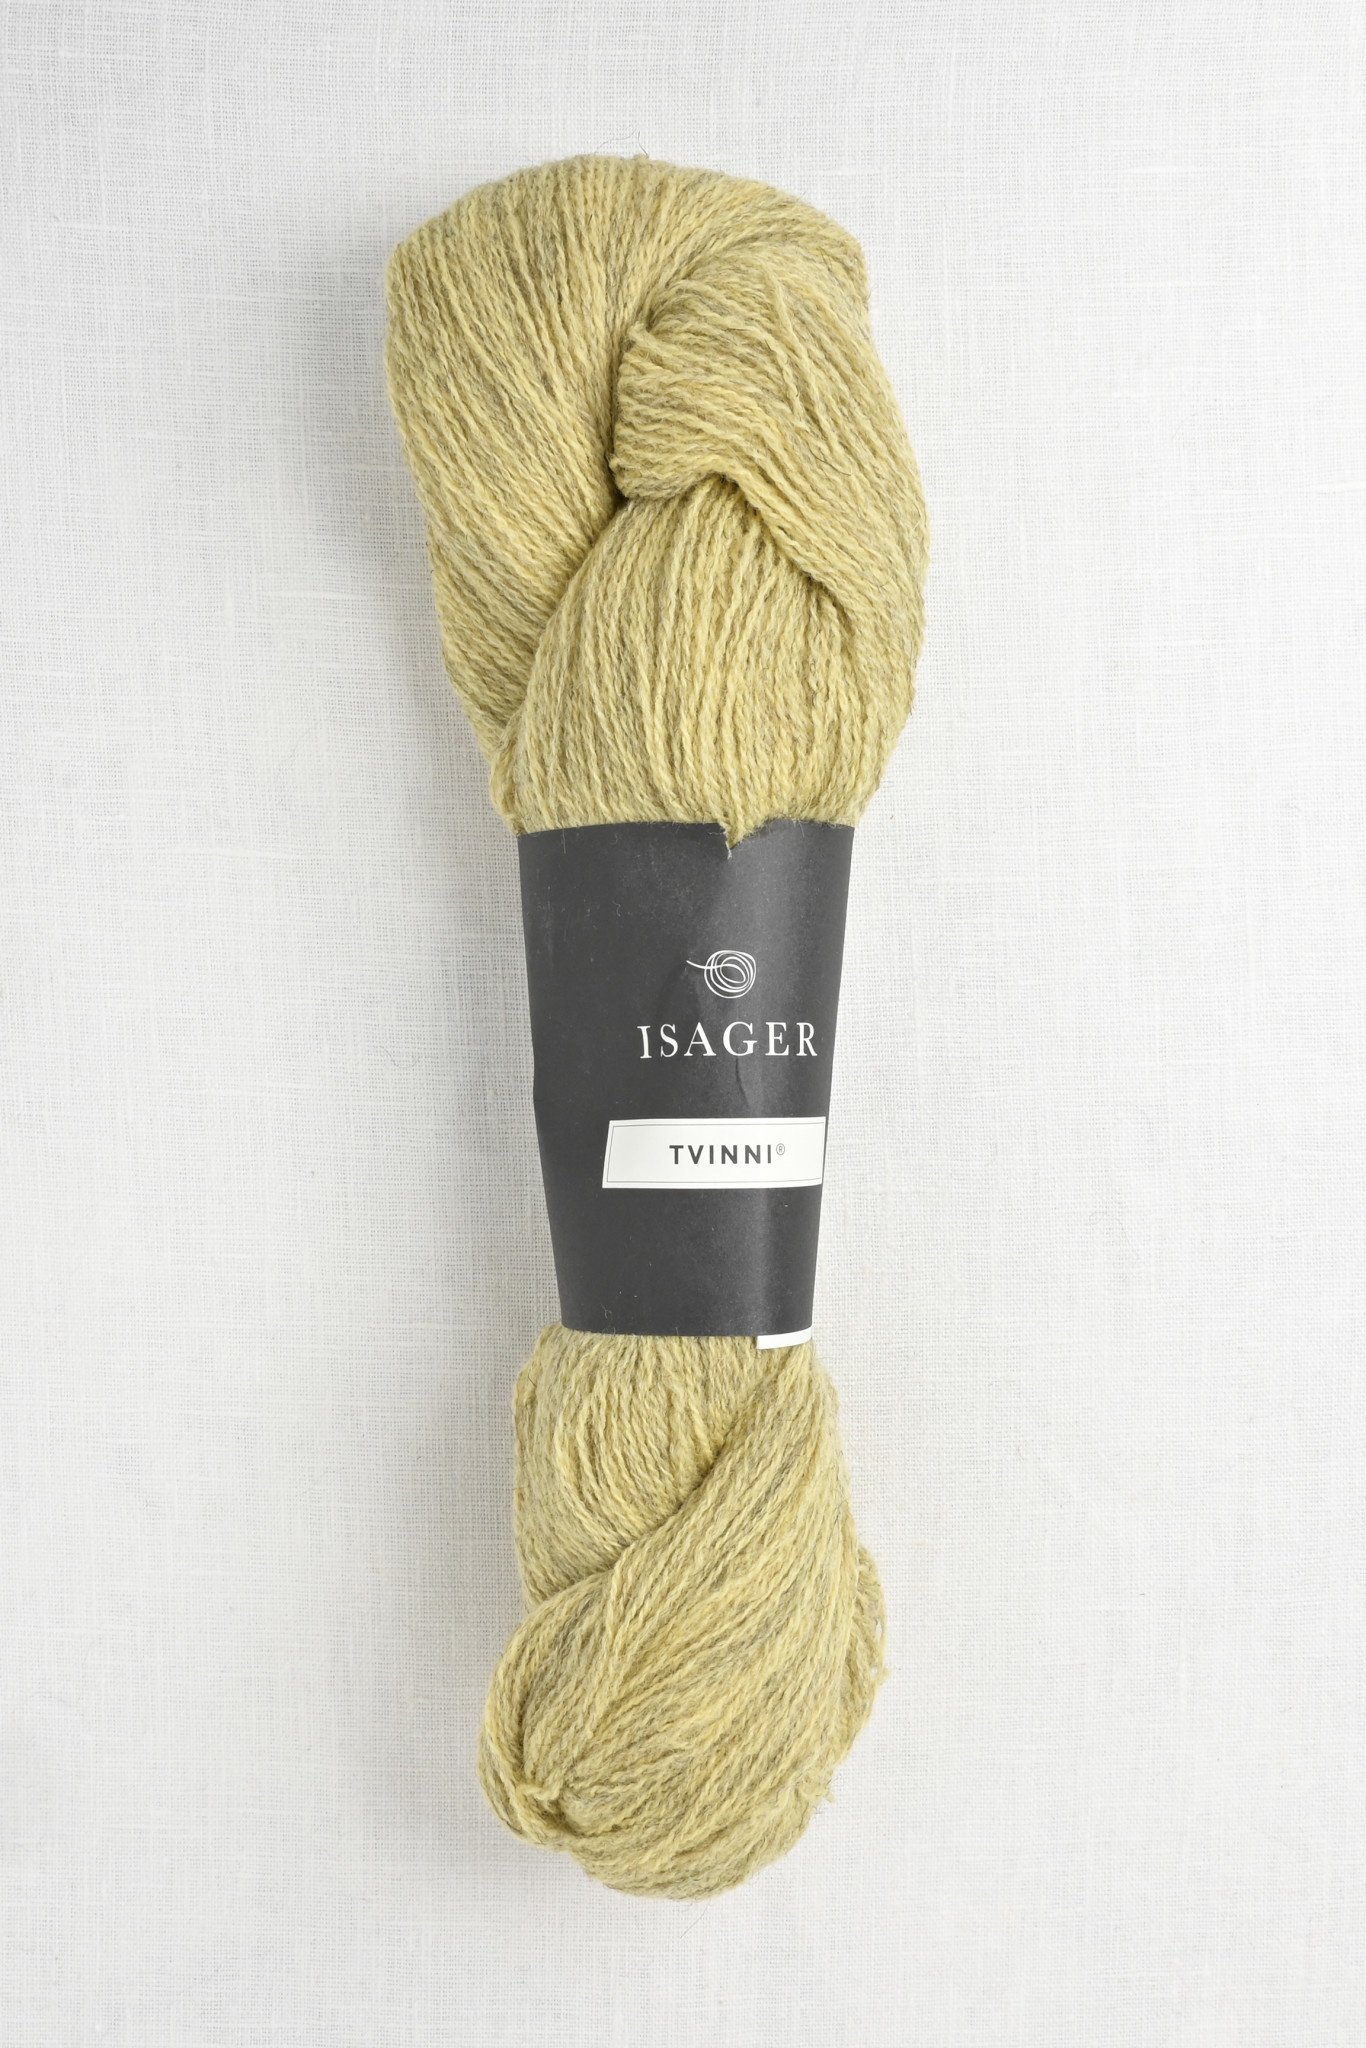 Isager Tvinni Pear - and Fine Yarn